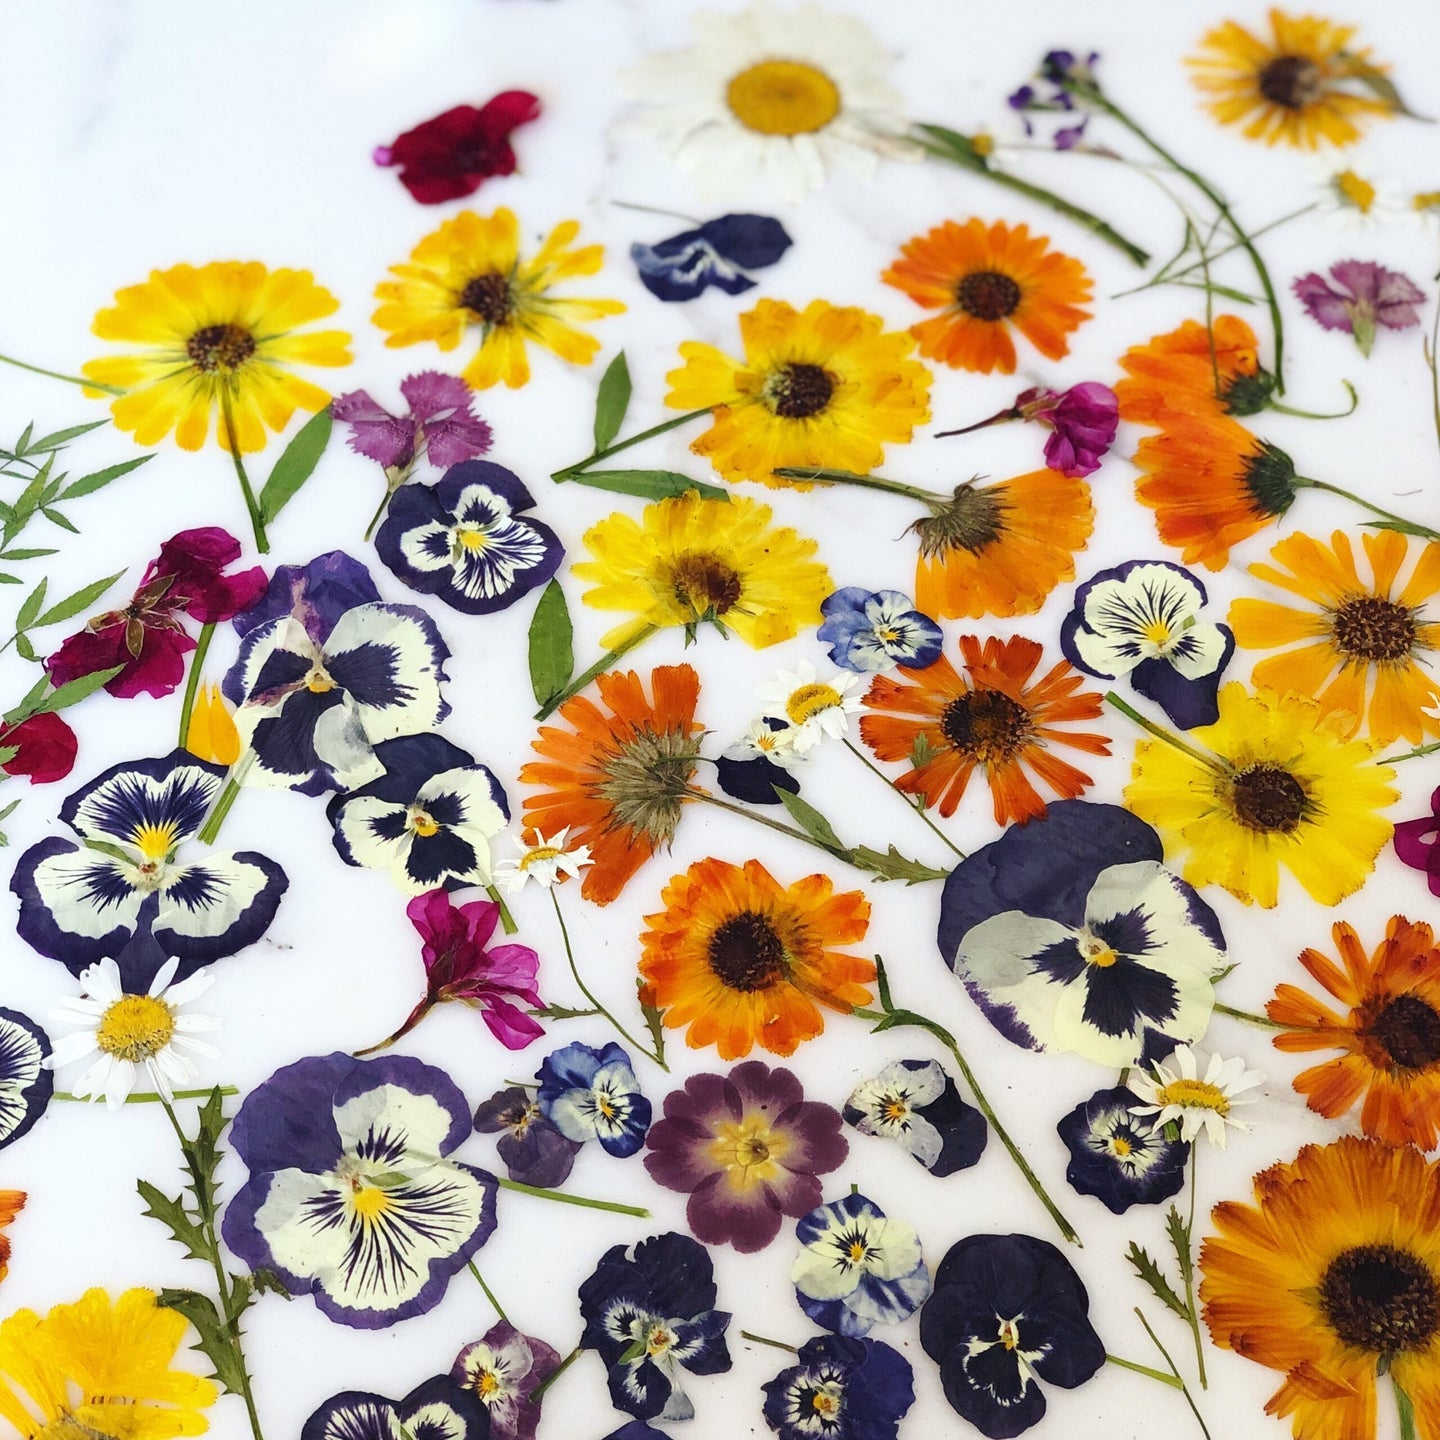 Pressed and dried flowers in purple, orange, and yellow